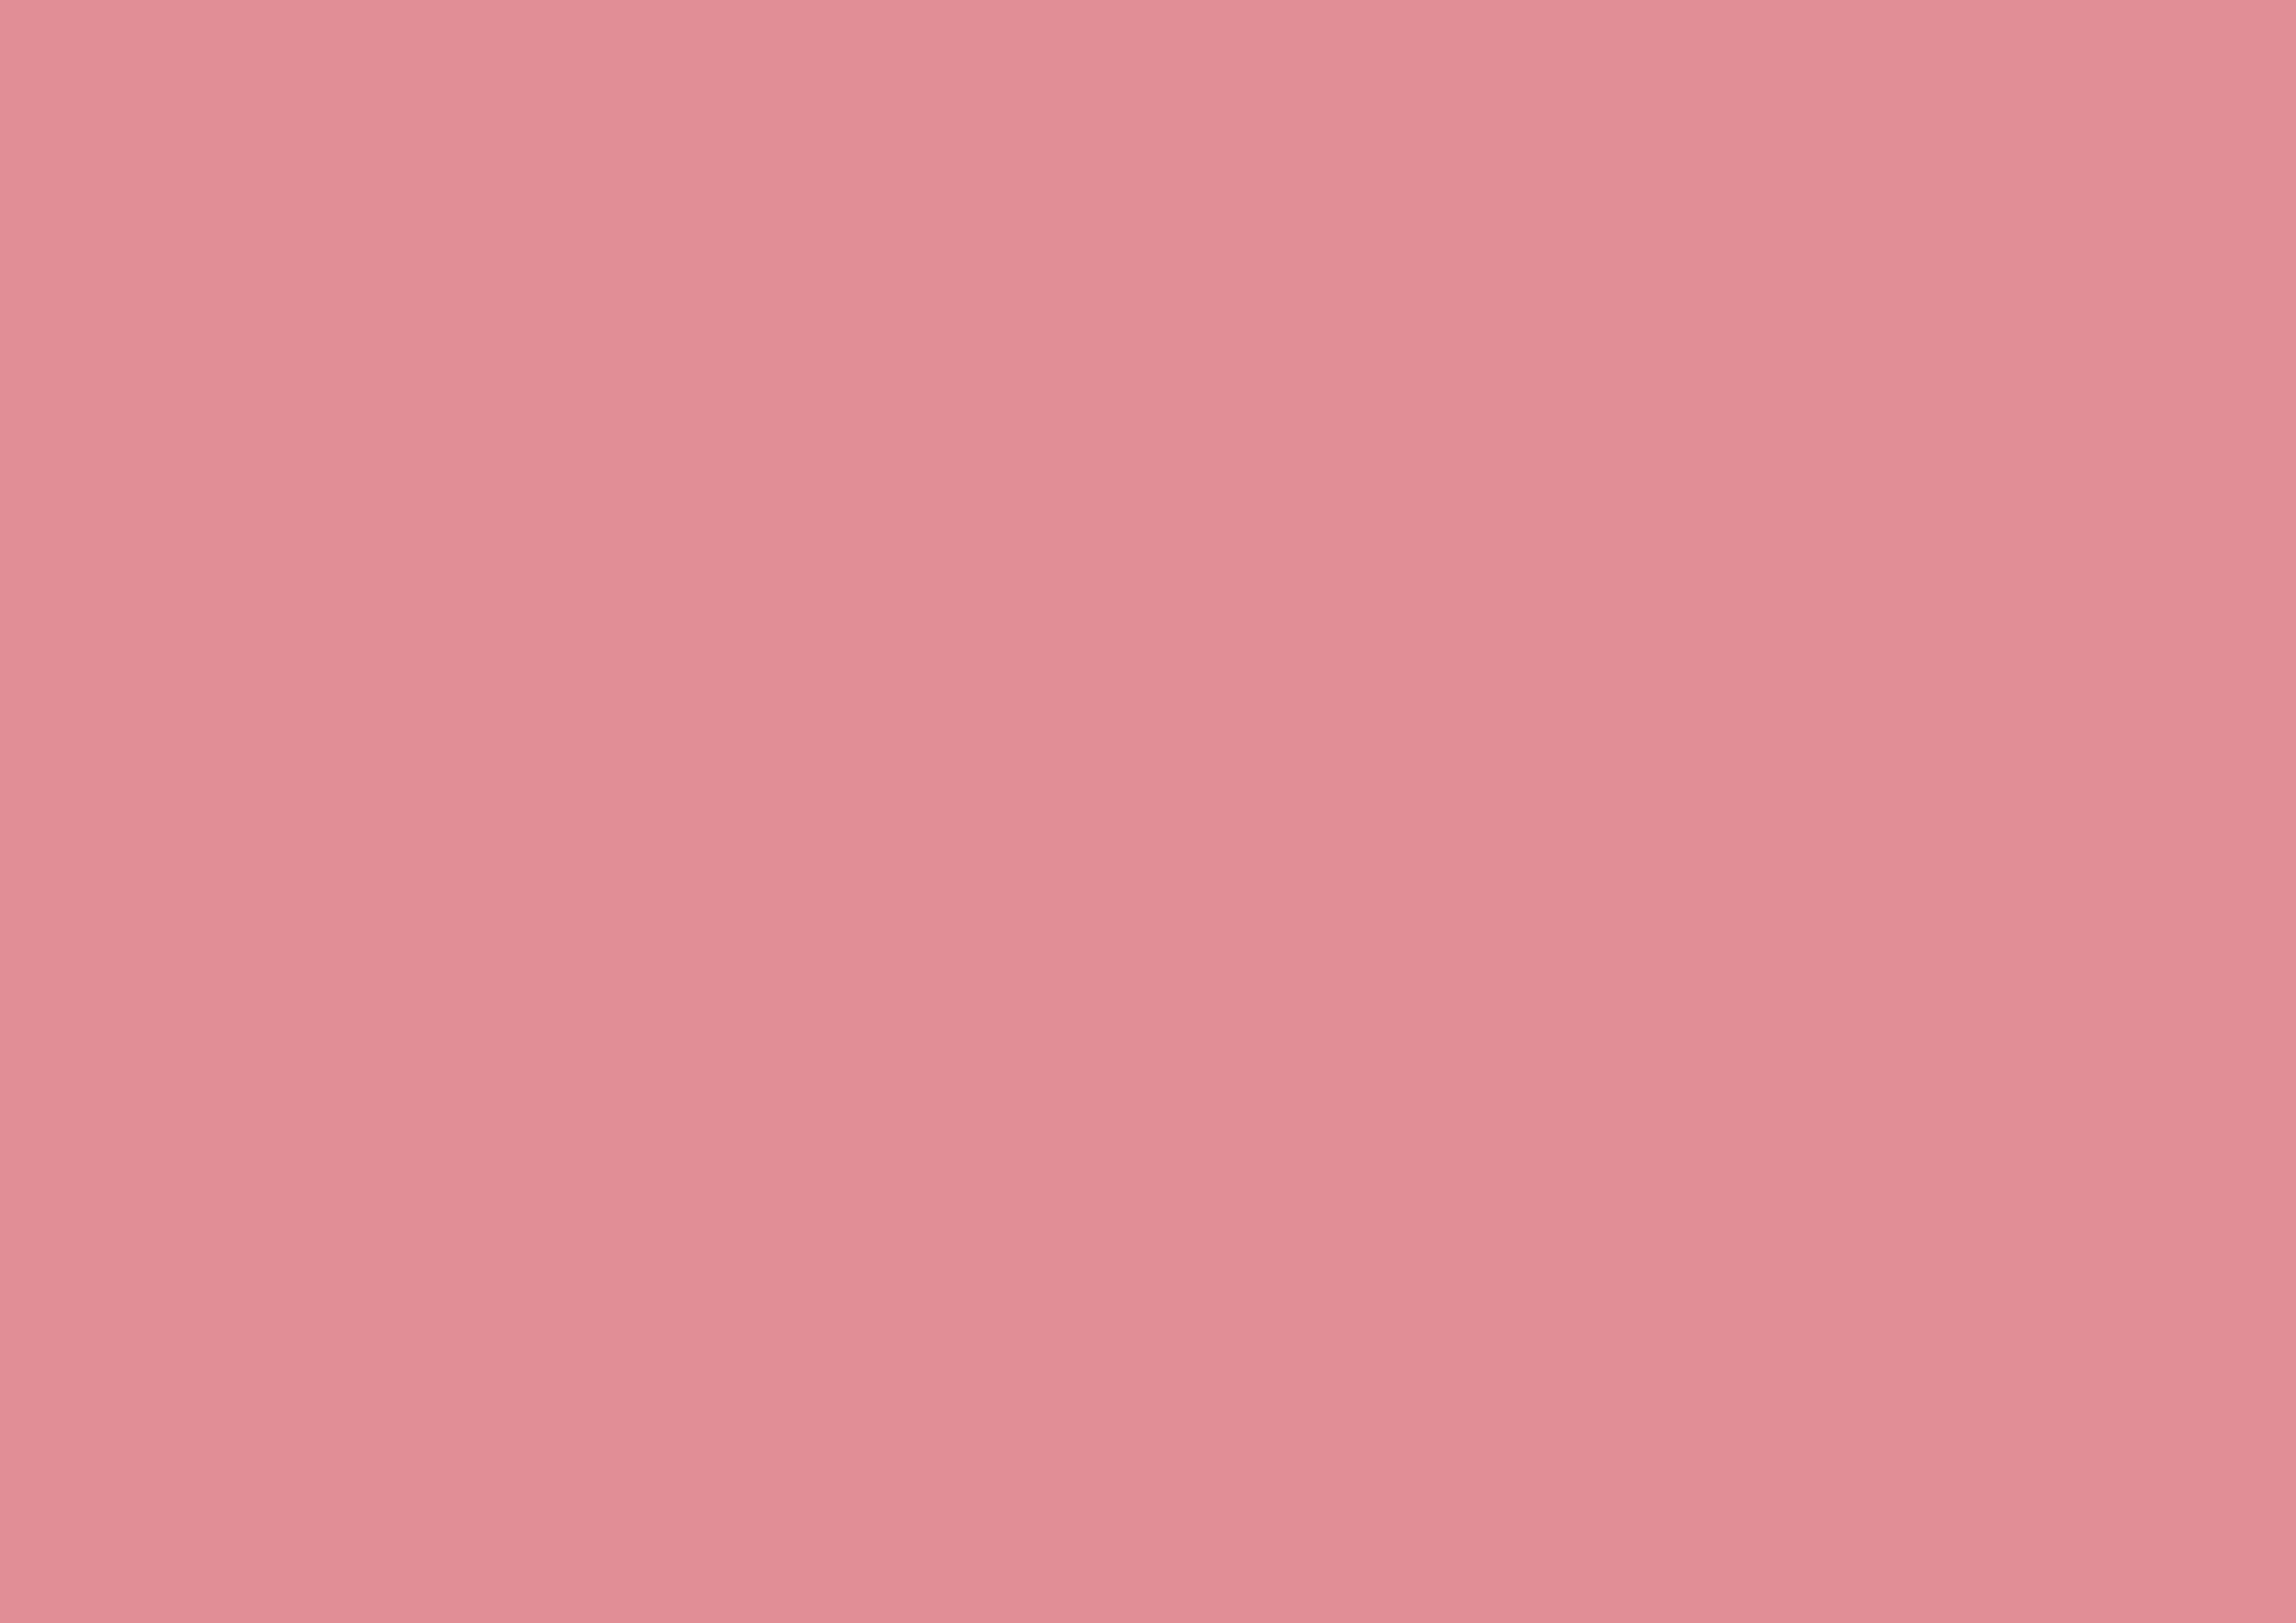 3508x2480 Ruddy Pink Solid Color Background